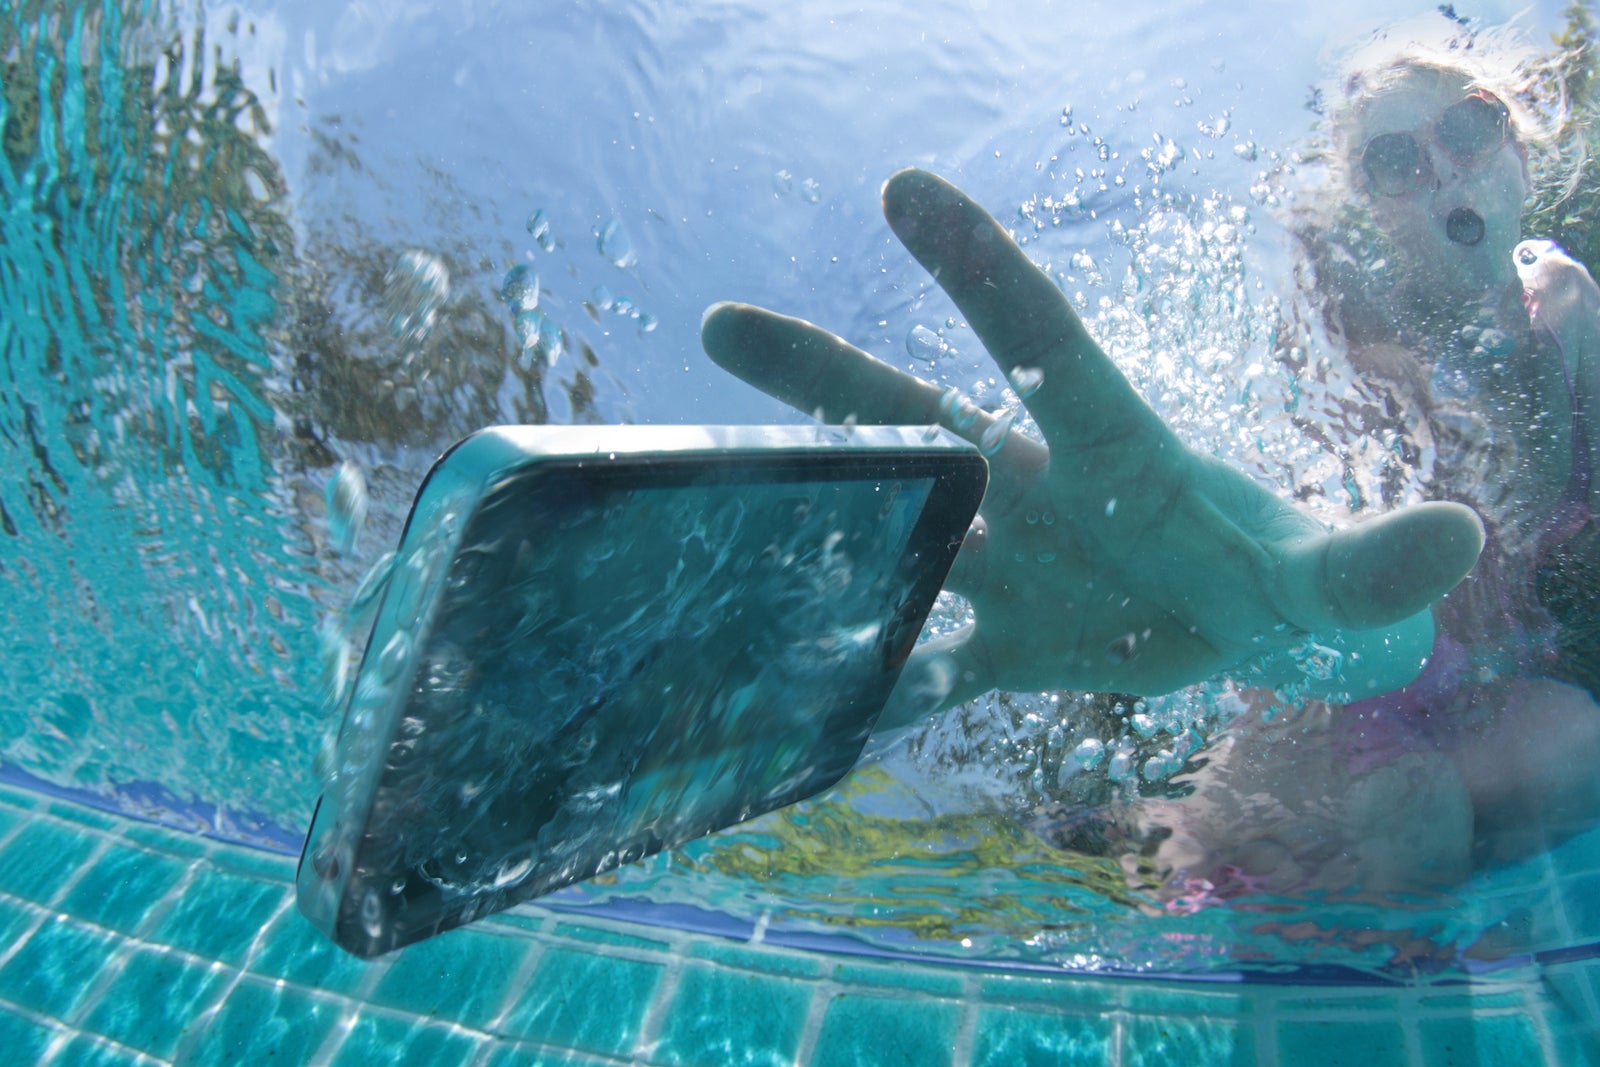 view from inside a swimming pool as a person reaches for a phone that just fell into the water